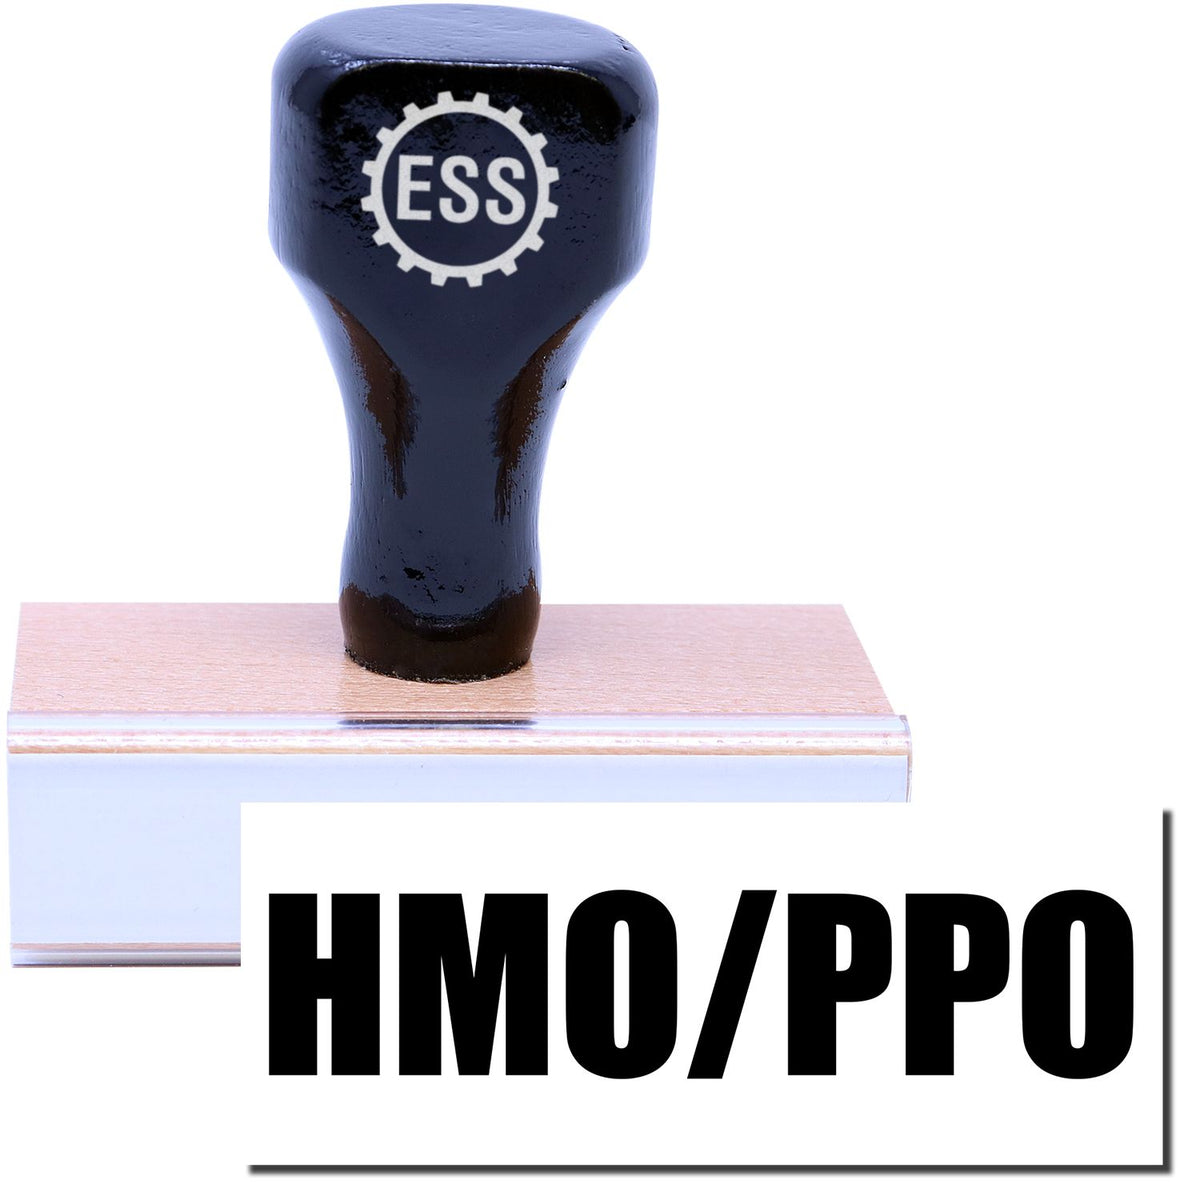 A stock office rubber stamp with a stamped image showing how the text &quot;HMO/PPO&quot; in a large font is displayed after stamping.